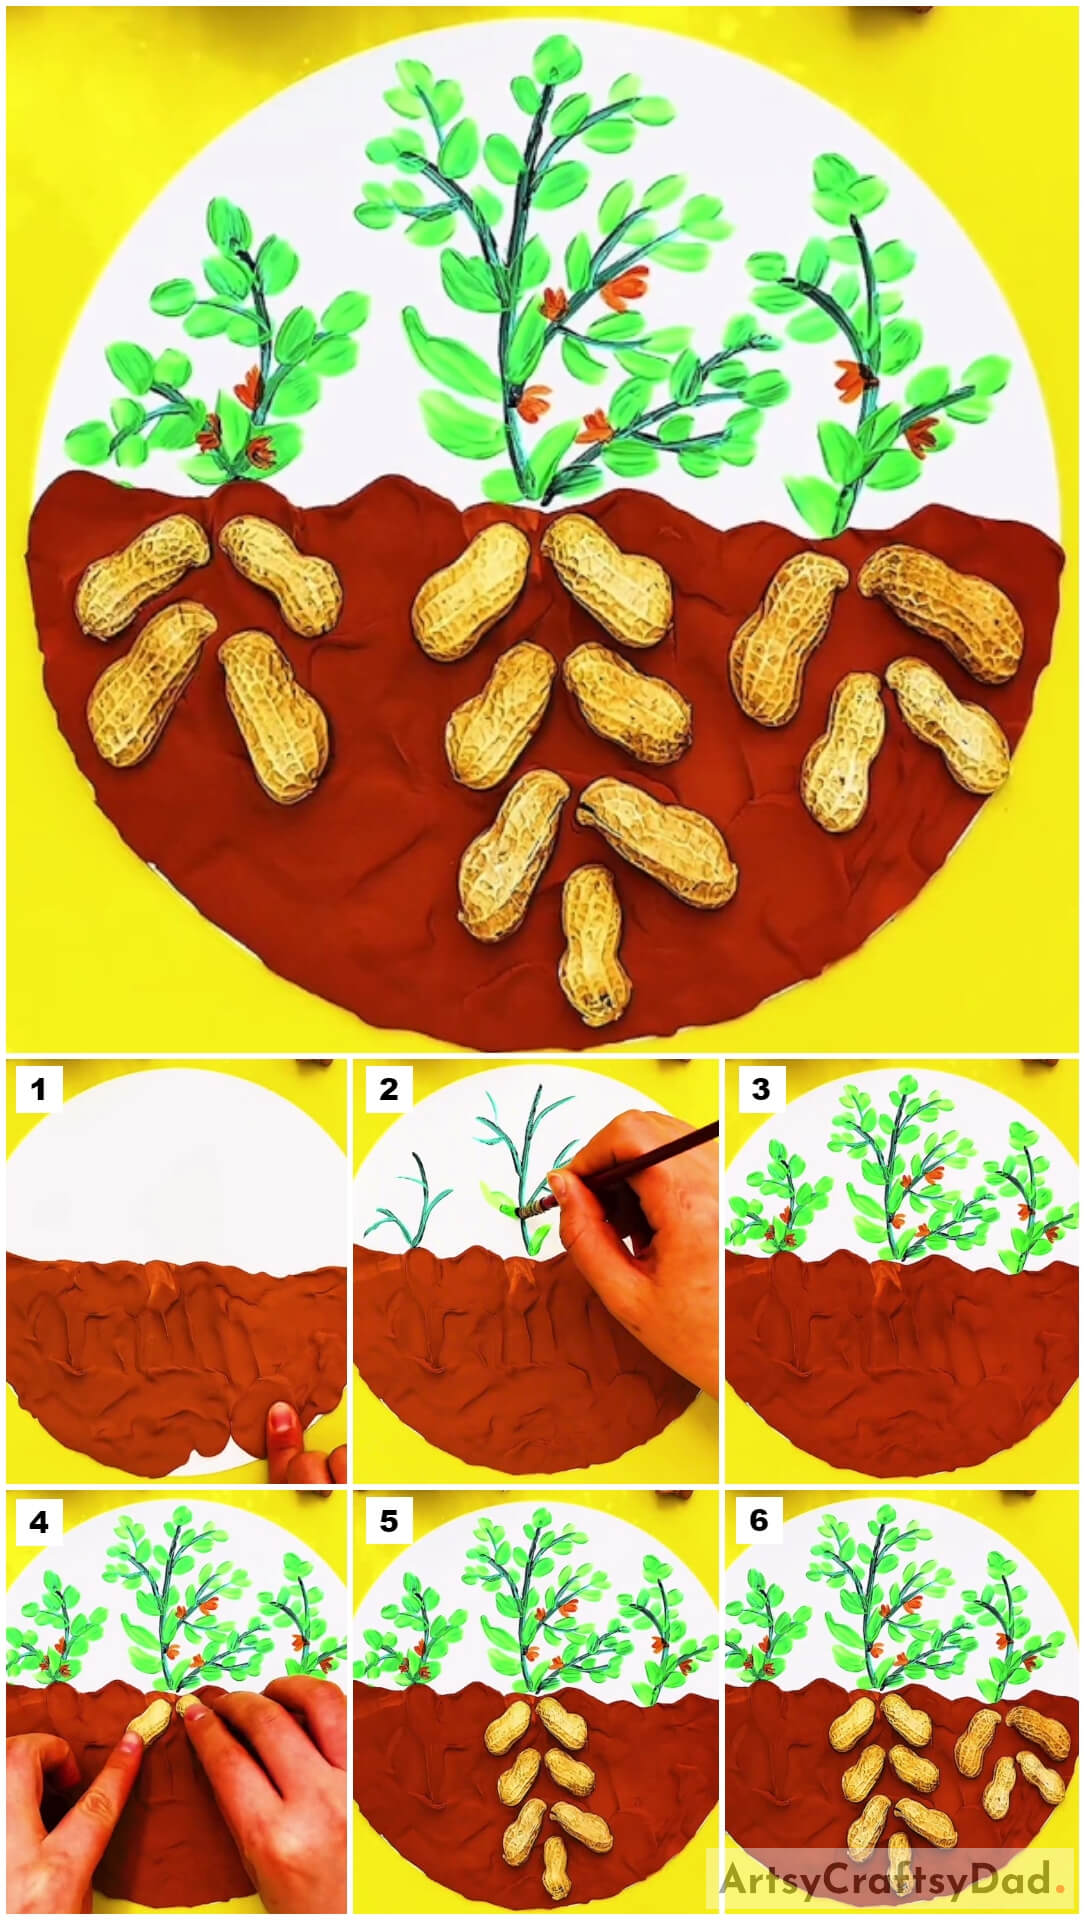 Plants With Roots In The Soil: Clay & Peanut Shell Craft Tutorial